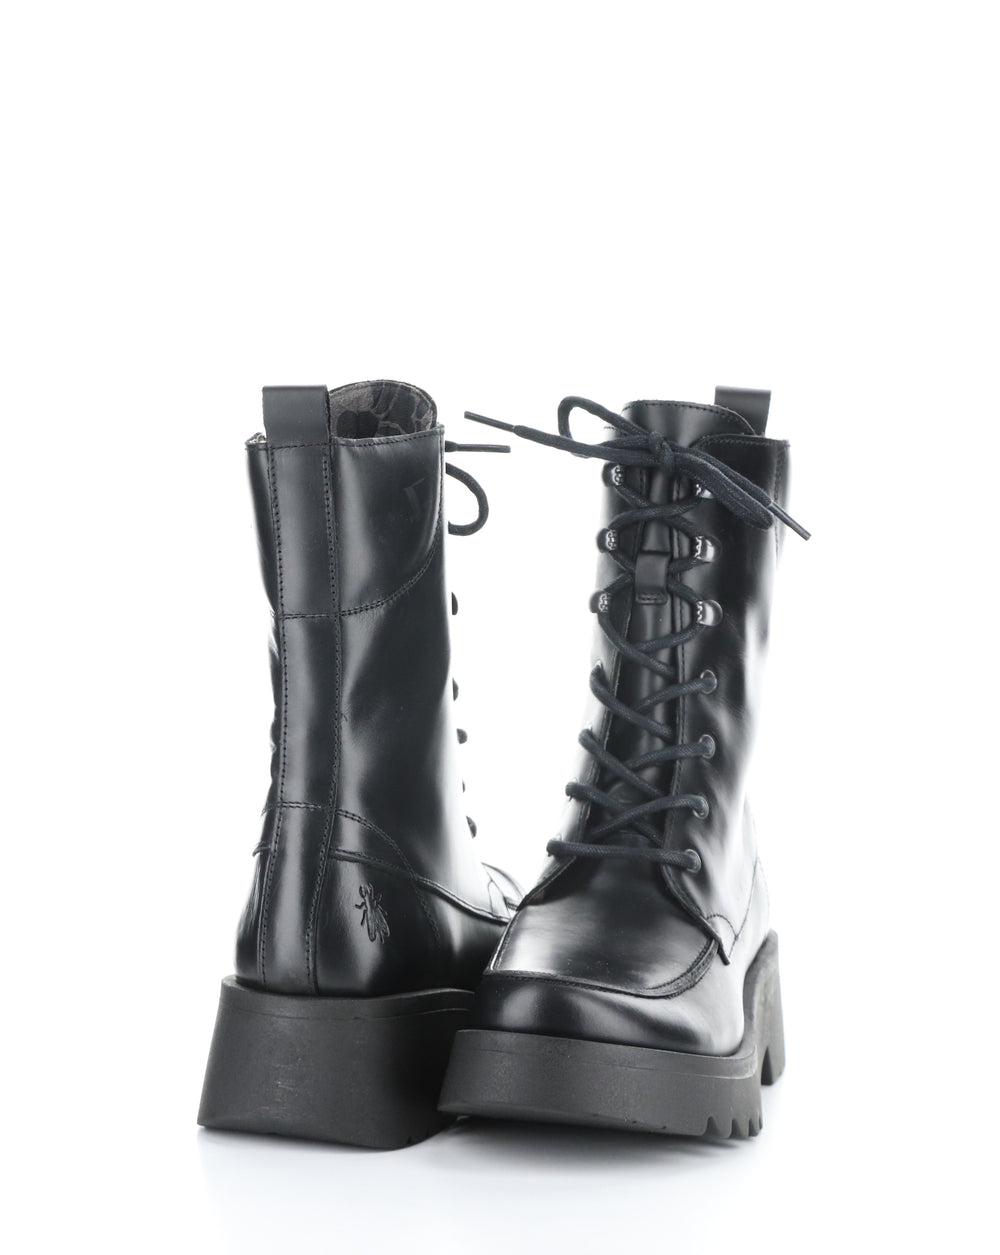 MORI990FLY 000 BLACK Lace-up Boots